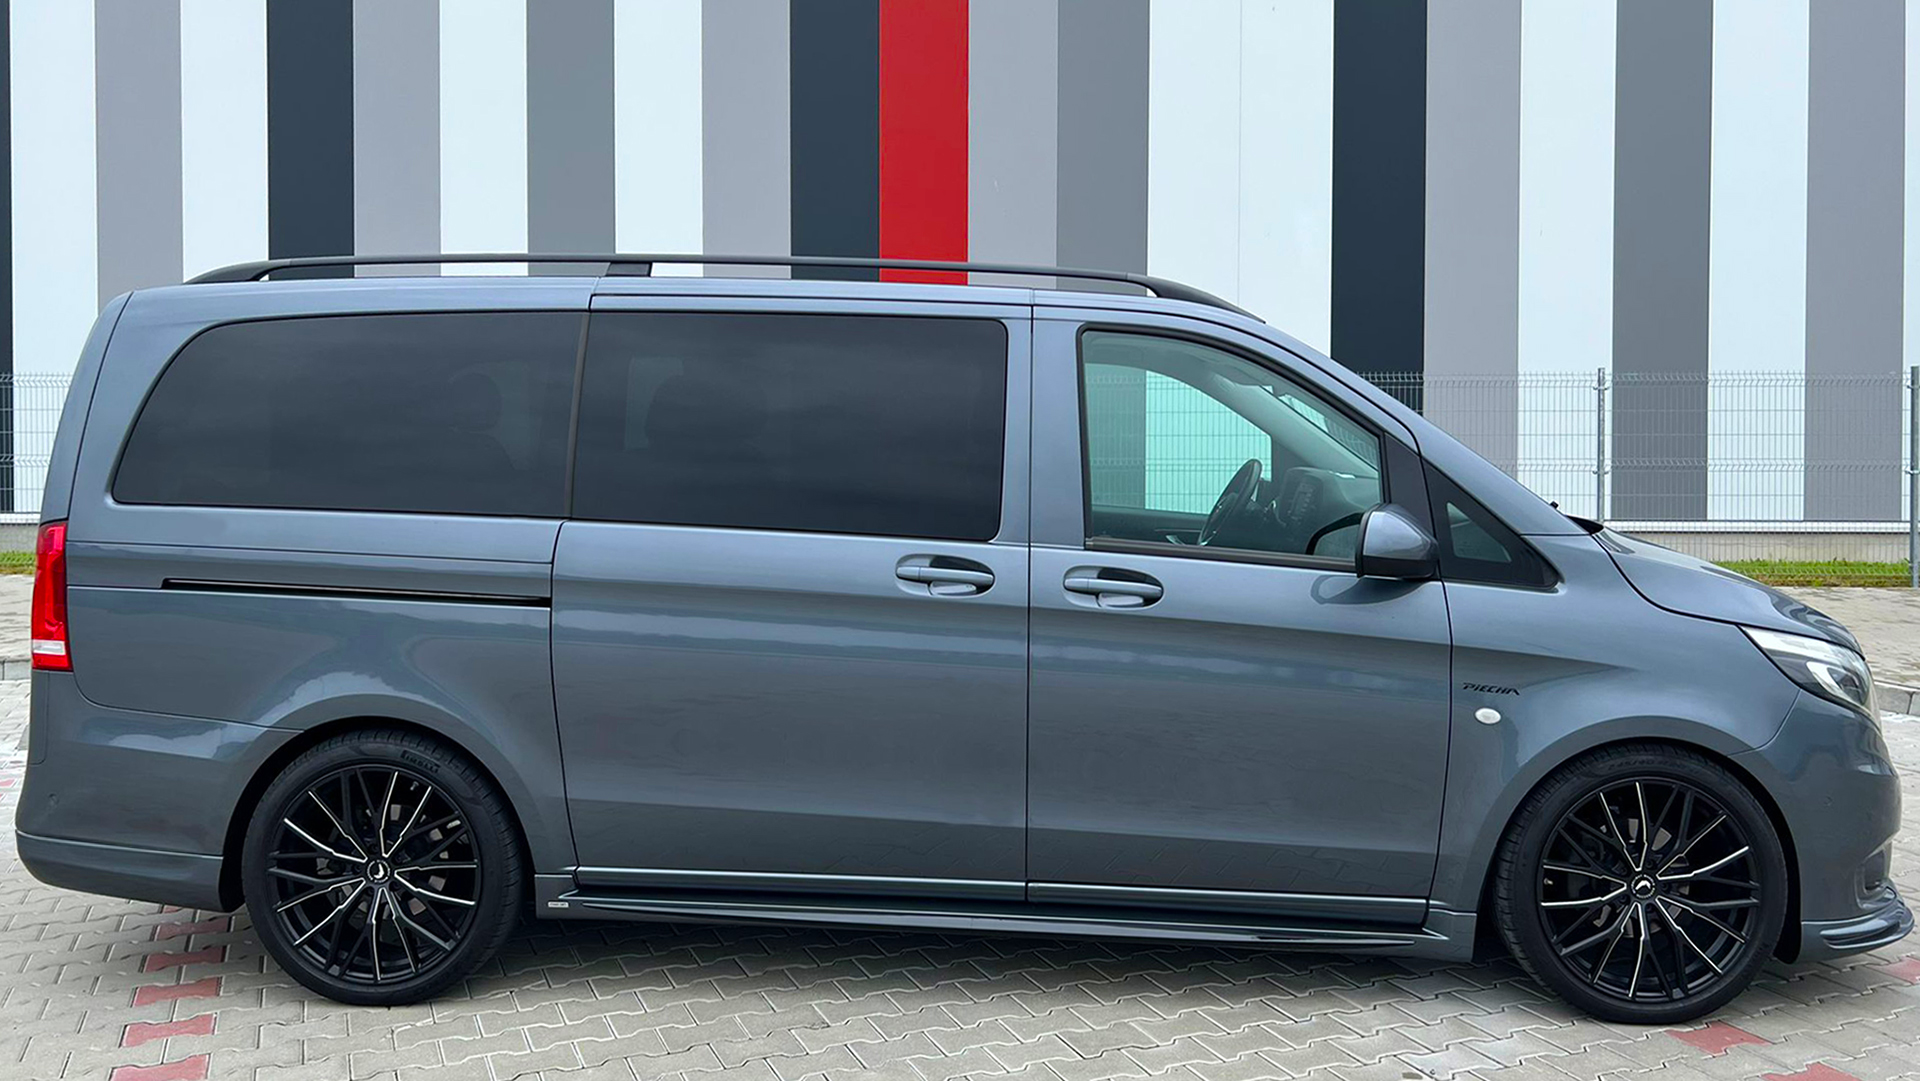 Piecha body kit for the Mercedes 447: Vito and V-Class in a sporty outfit,  JMS - Fahrzeugteile GmbH, Story - lifePR